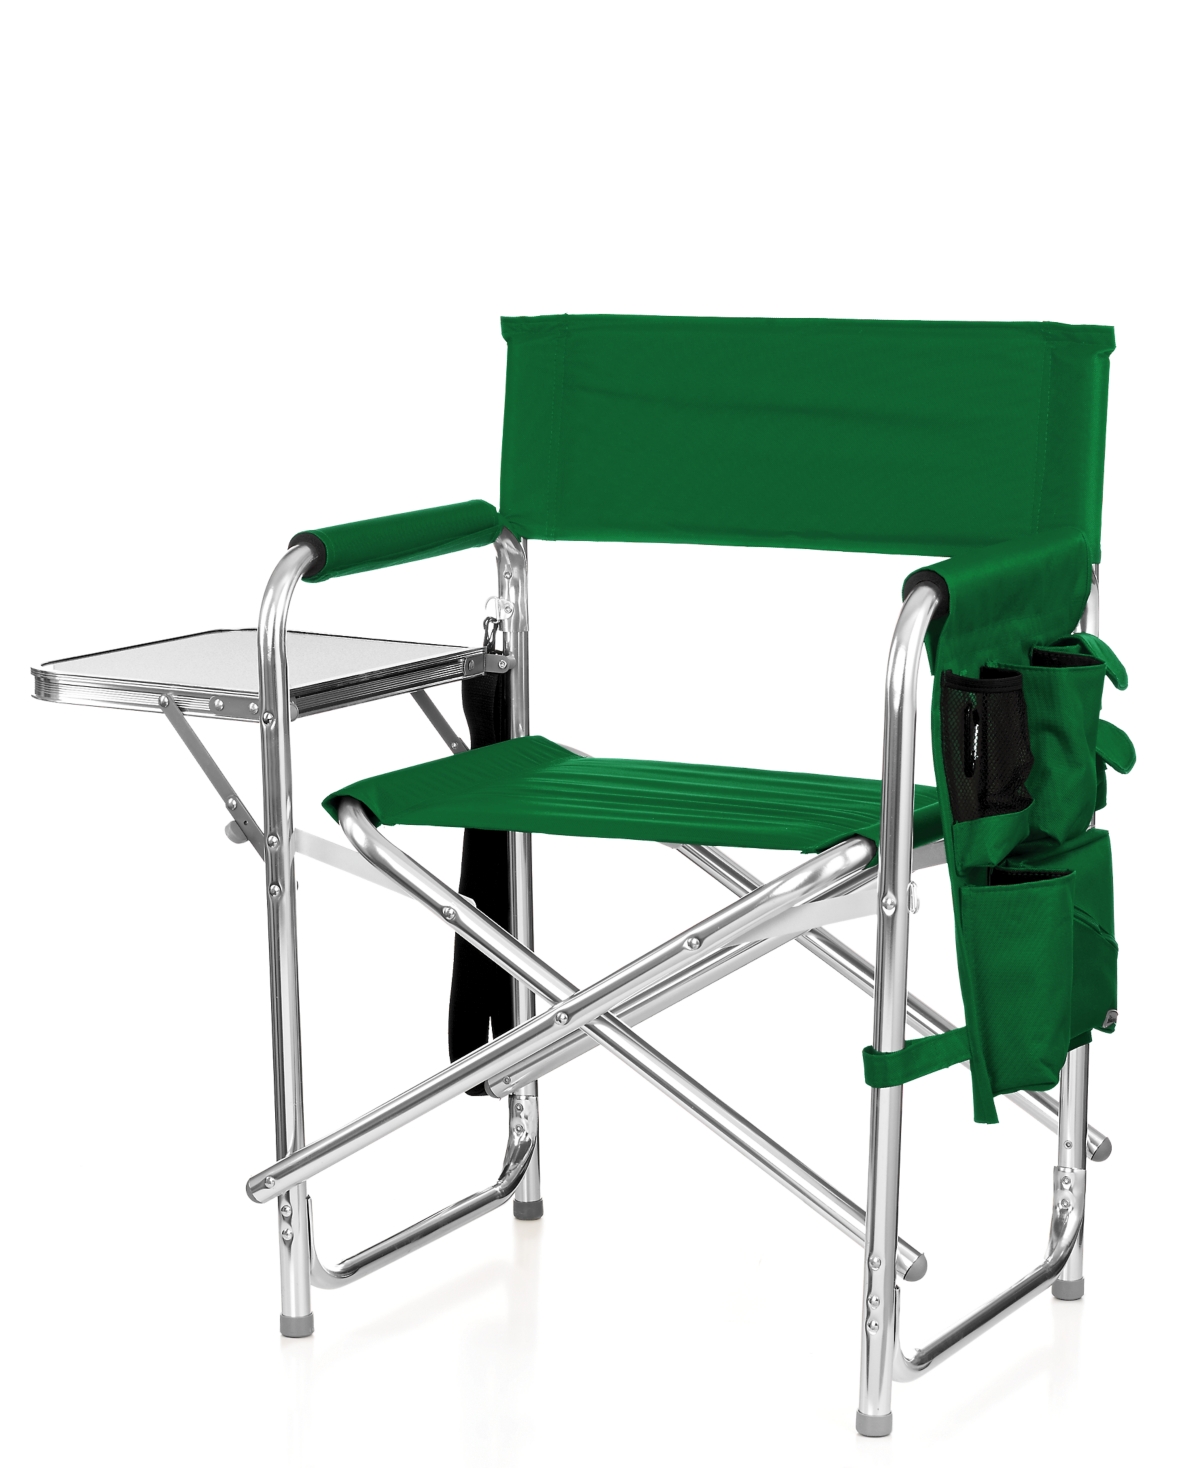 by Picnic Time Portable Folding Sports Chair - Hunter Green